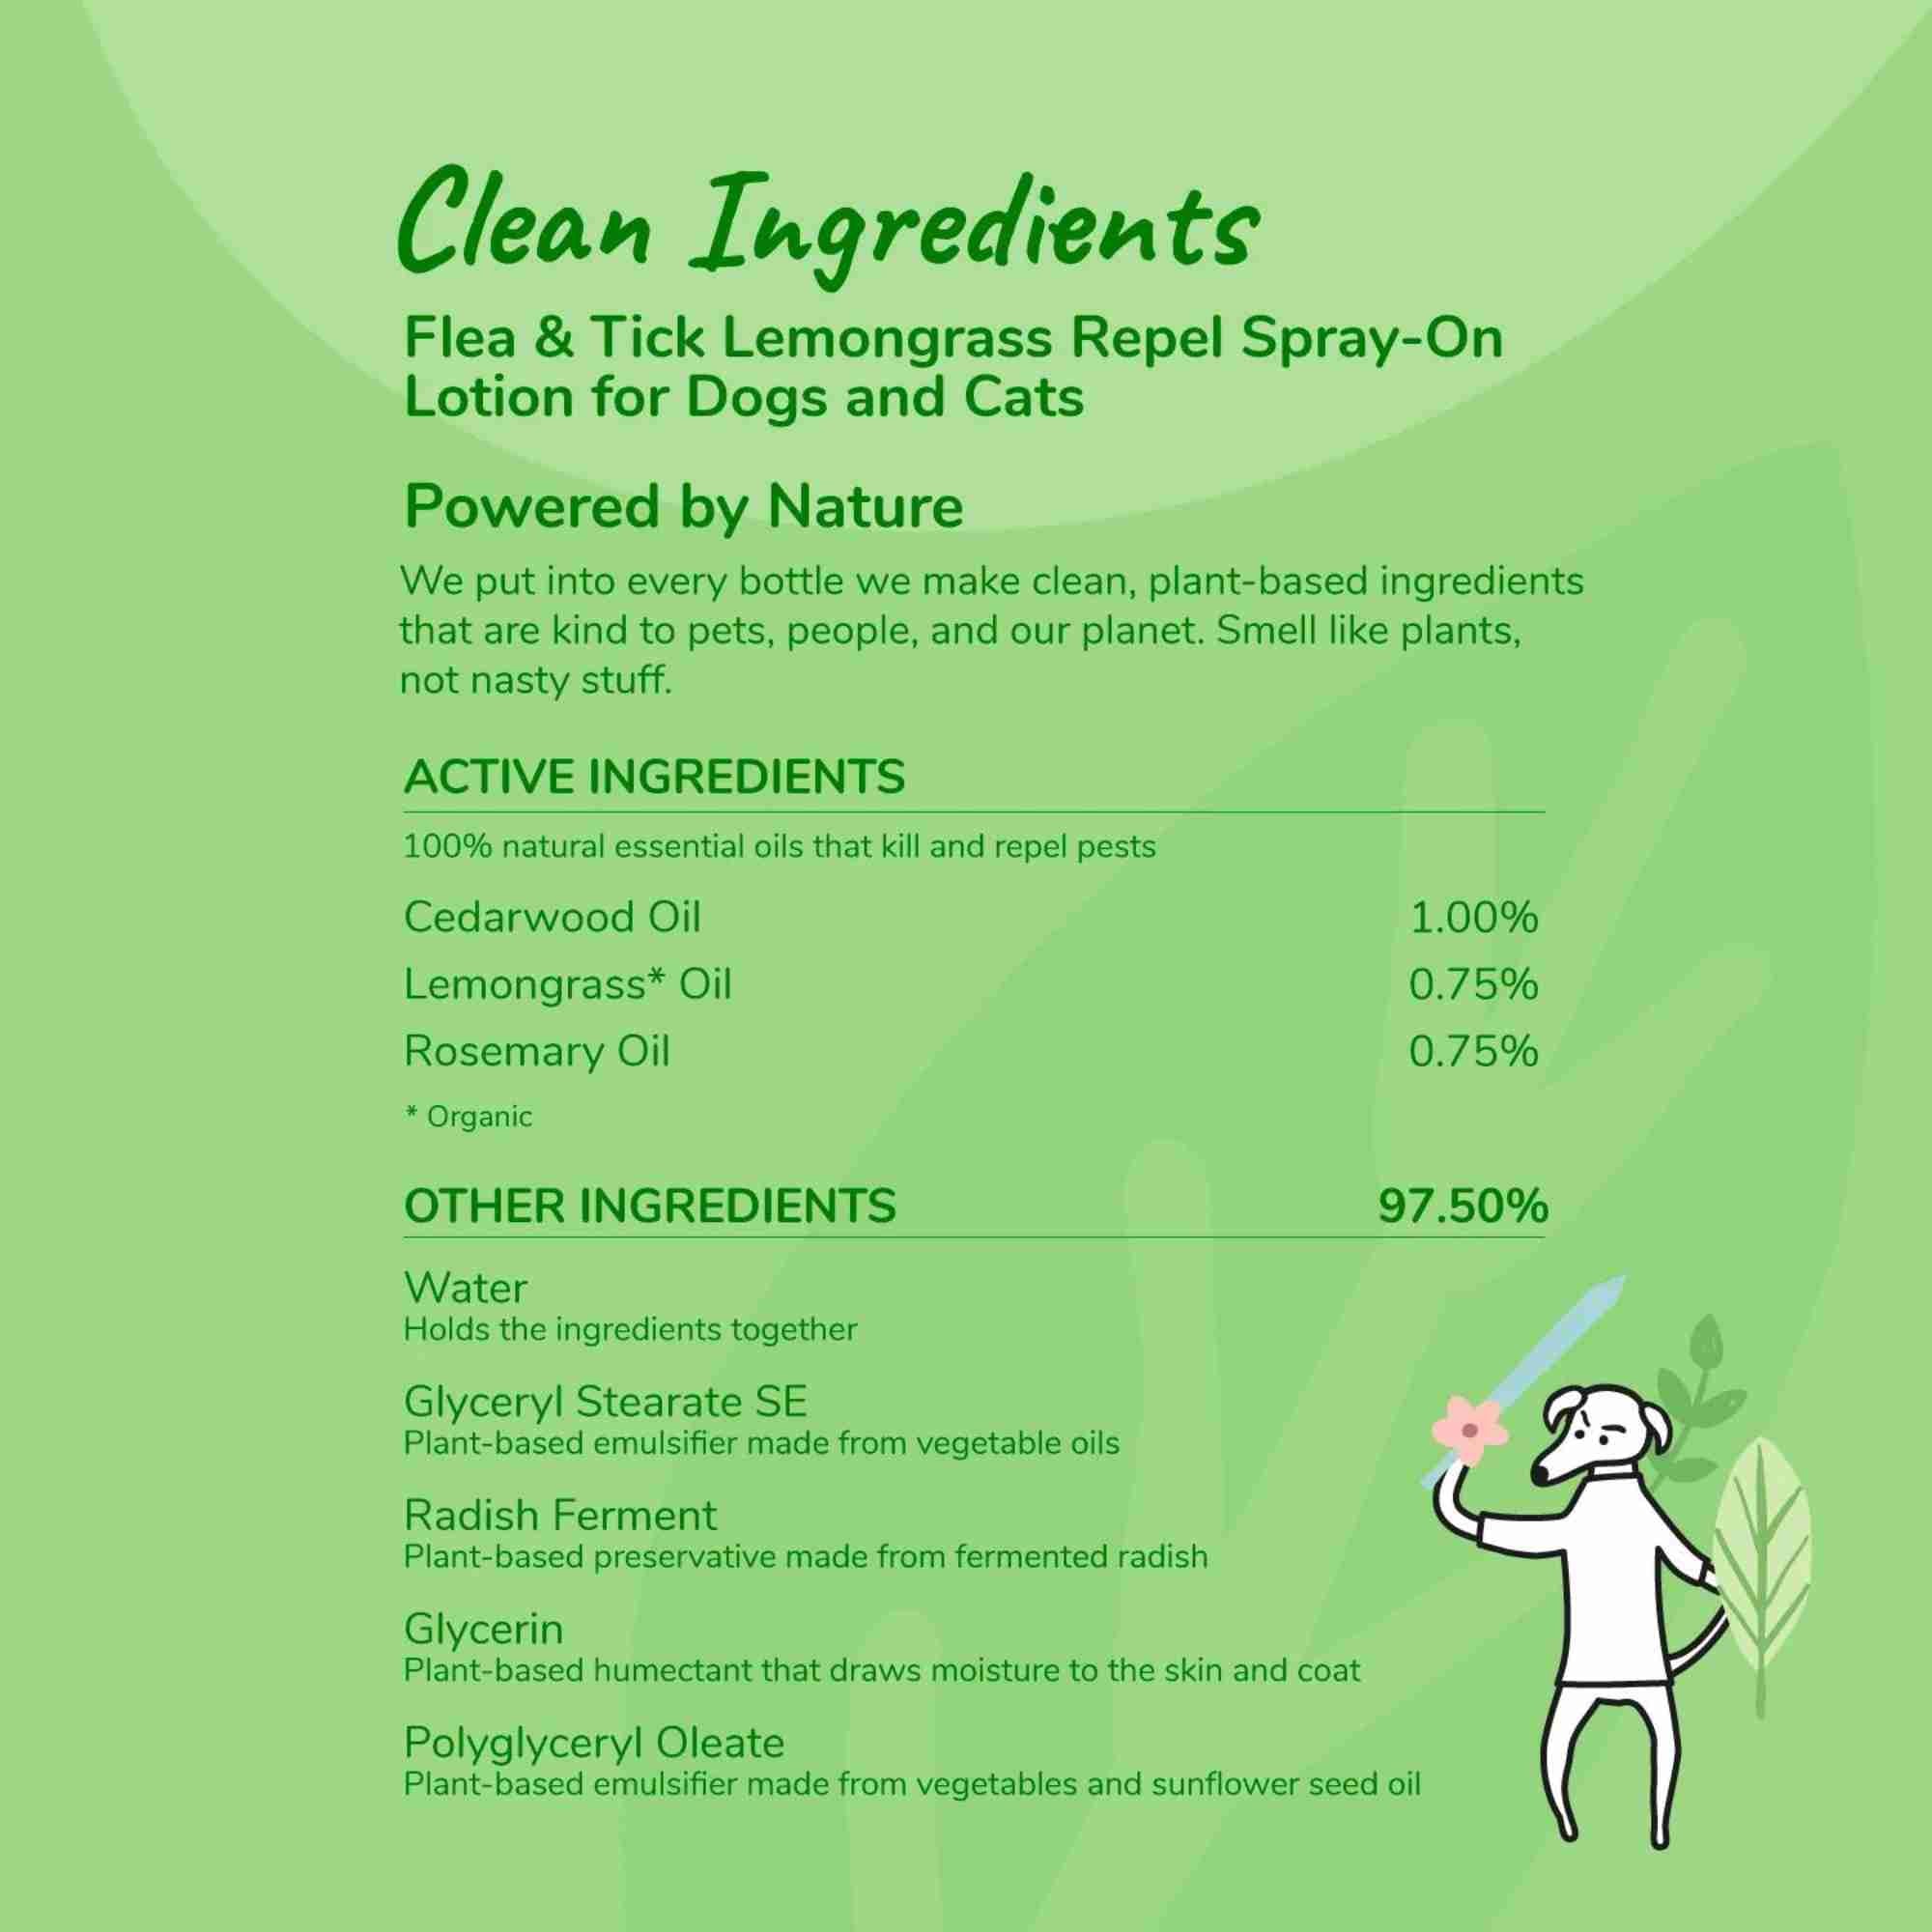 Flea and Tick Prevent - Kin and Kind ingredient list for dog and cat lemongrass scent repel pest and vet formulated